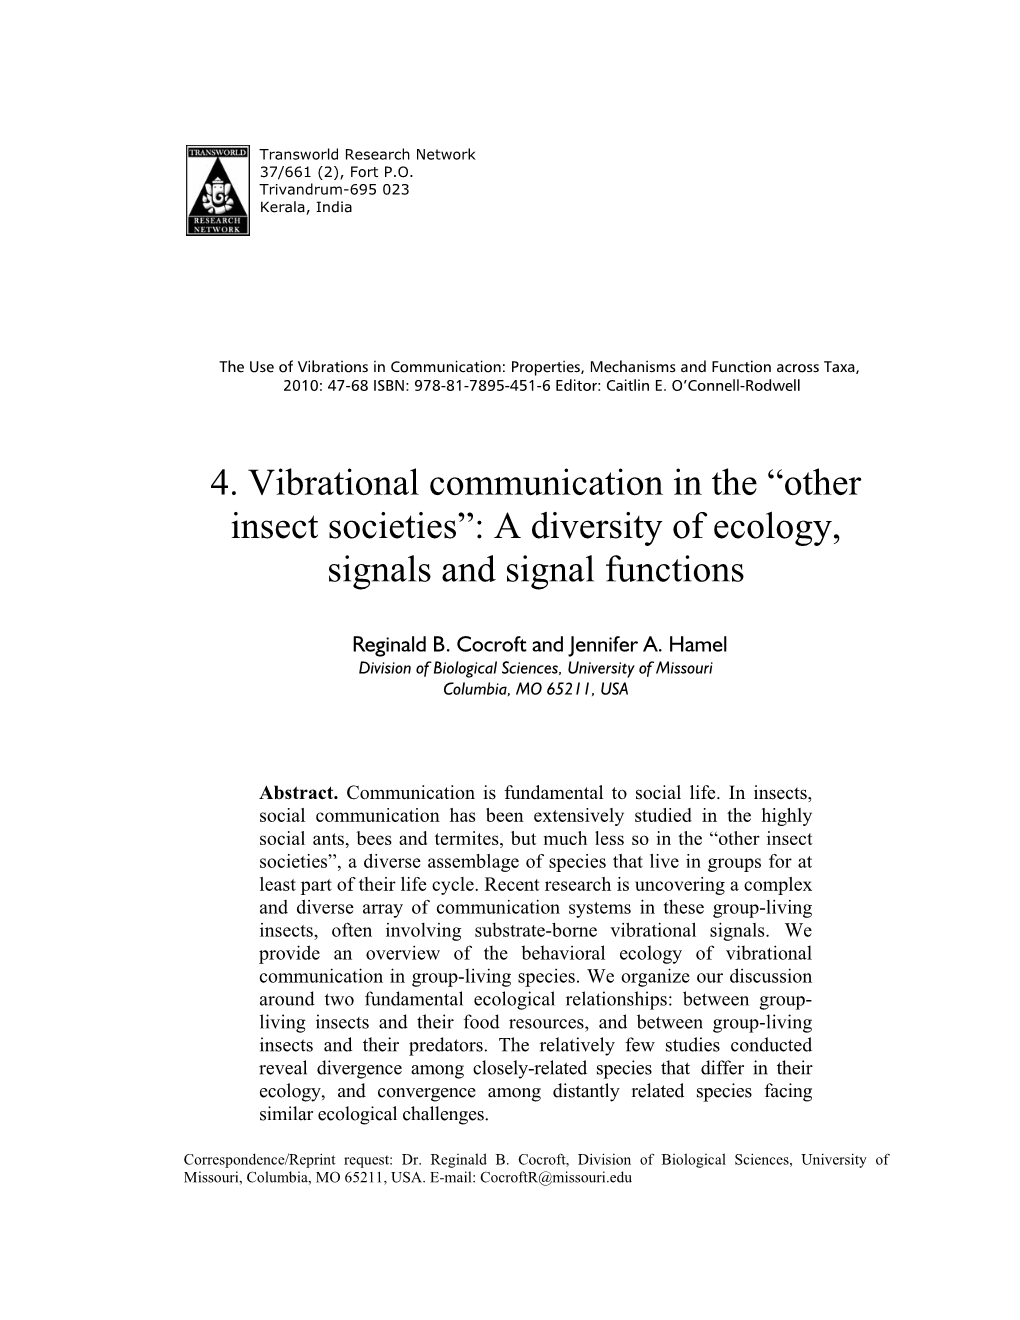 4. Vibrational Communication in the ““Other Insect